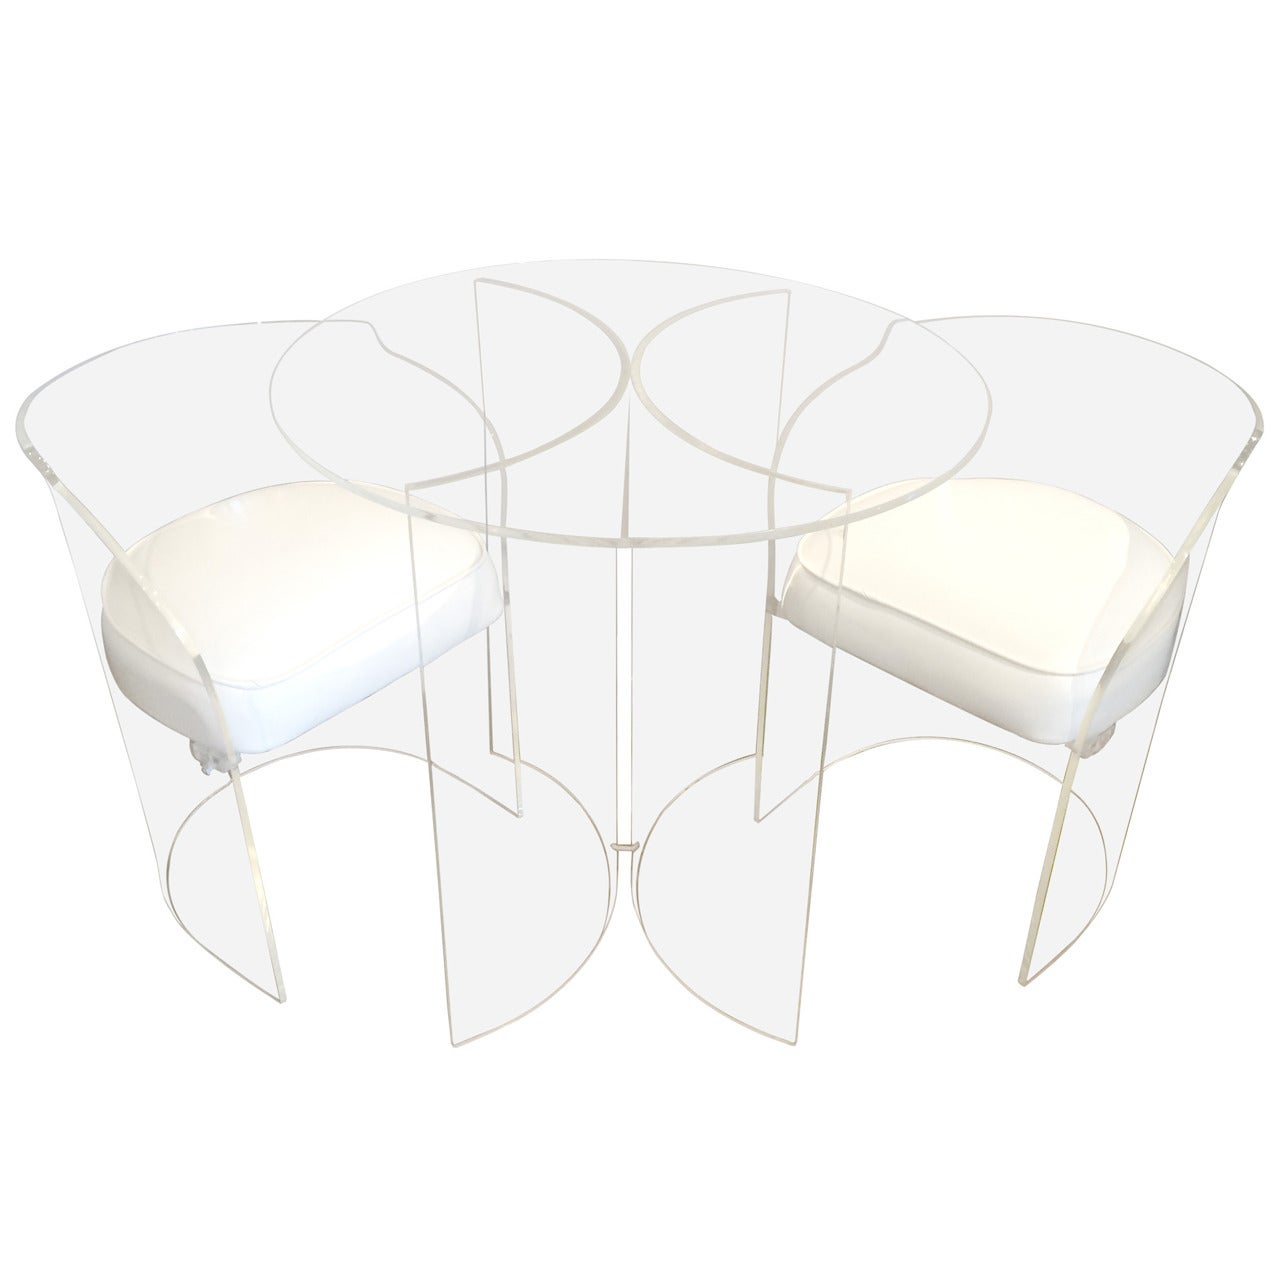 Lucite Set of Table and Chairs